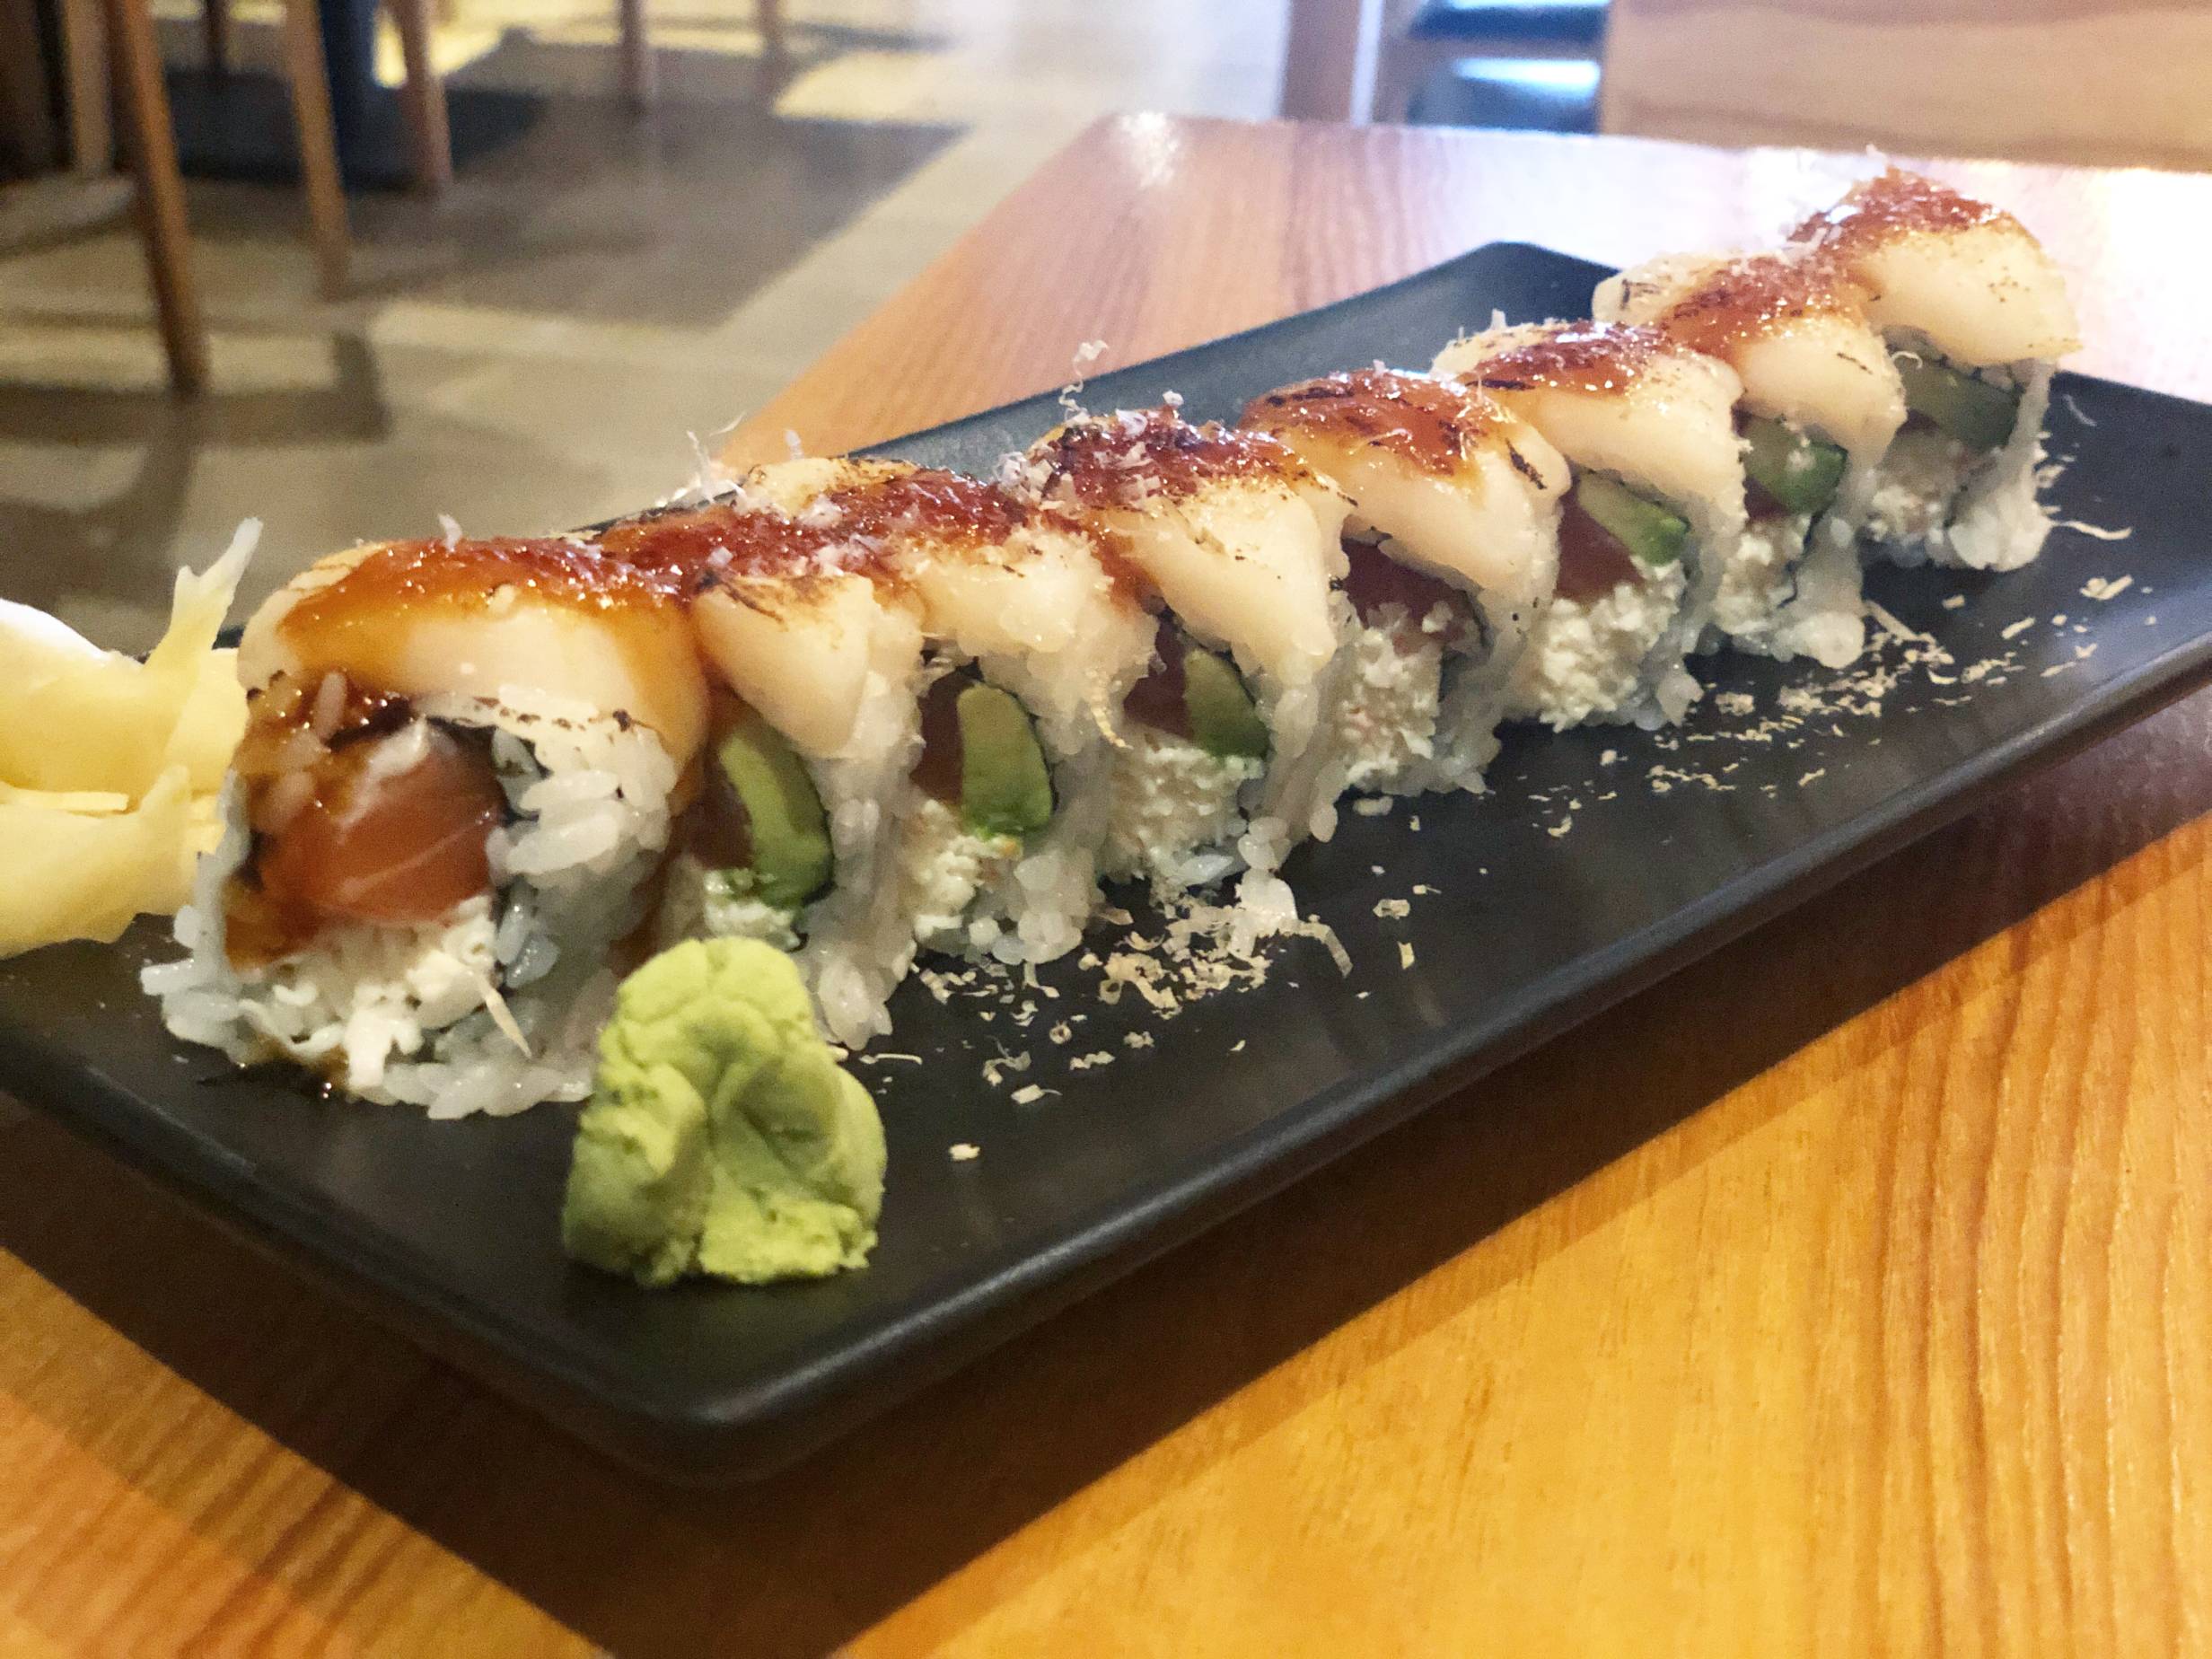 An urarmaki roll sit on a black rectangular plate on a wooden table. The sushi roll has white sushi rice wrapped around nori with raw salmon, avocado, and crab inside. On top of the roll, there is a small piece of scallop with a dark sauce and a dusting of fish flakes. Next to the roll on the left side of the plate is a pile of yellow pickled ginger and a small mound of green wasabi. Photo by Alyssa Buckley.